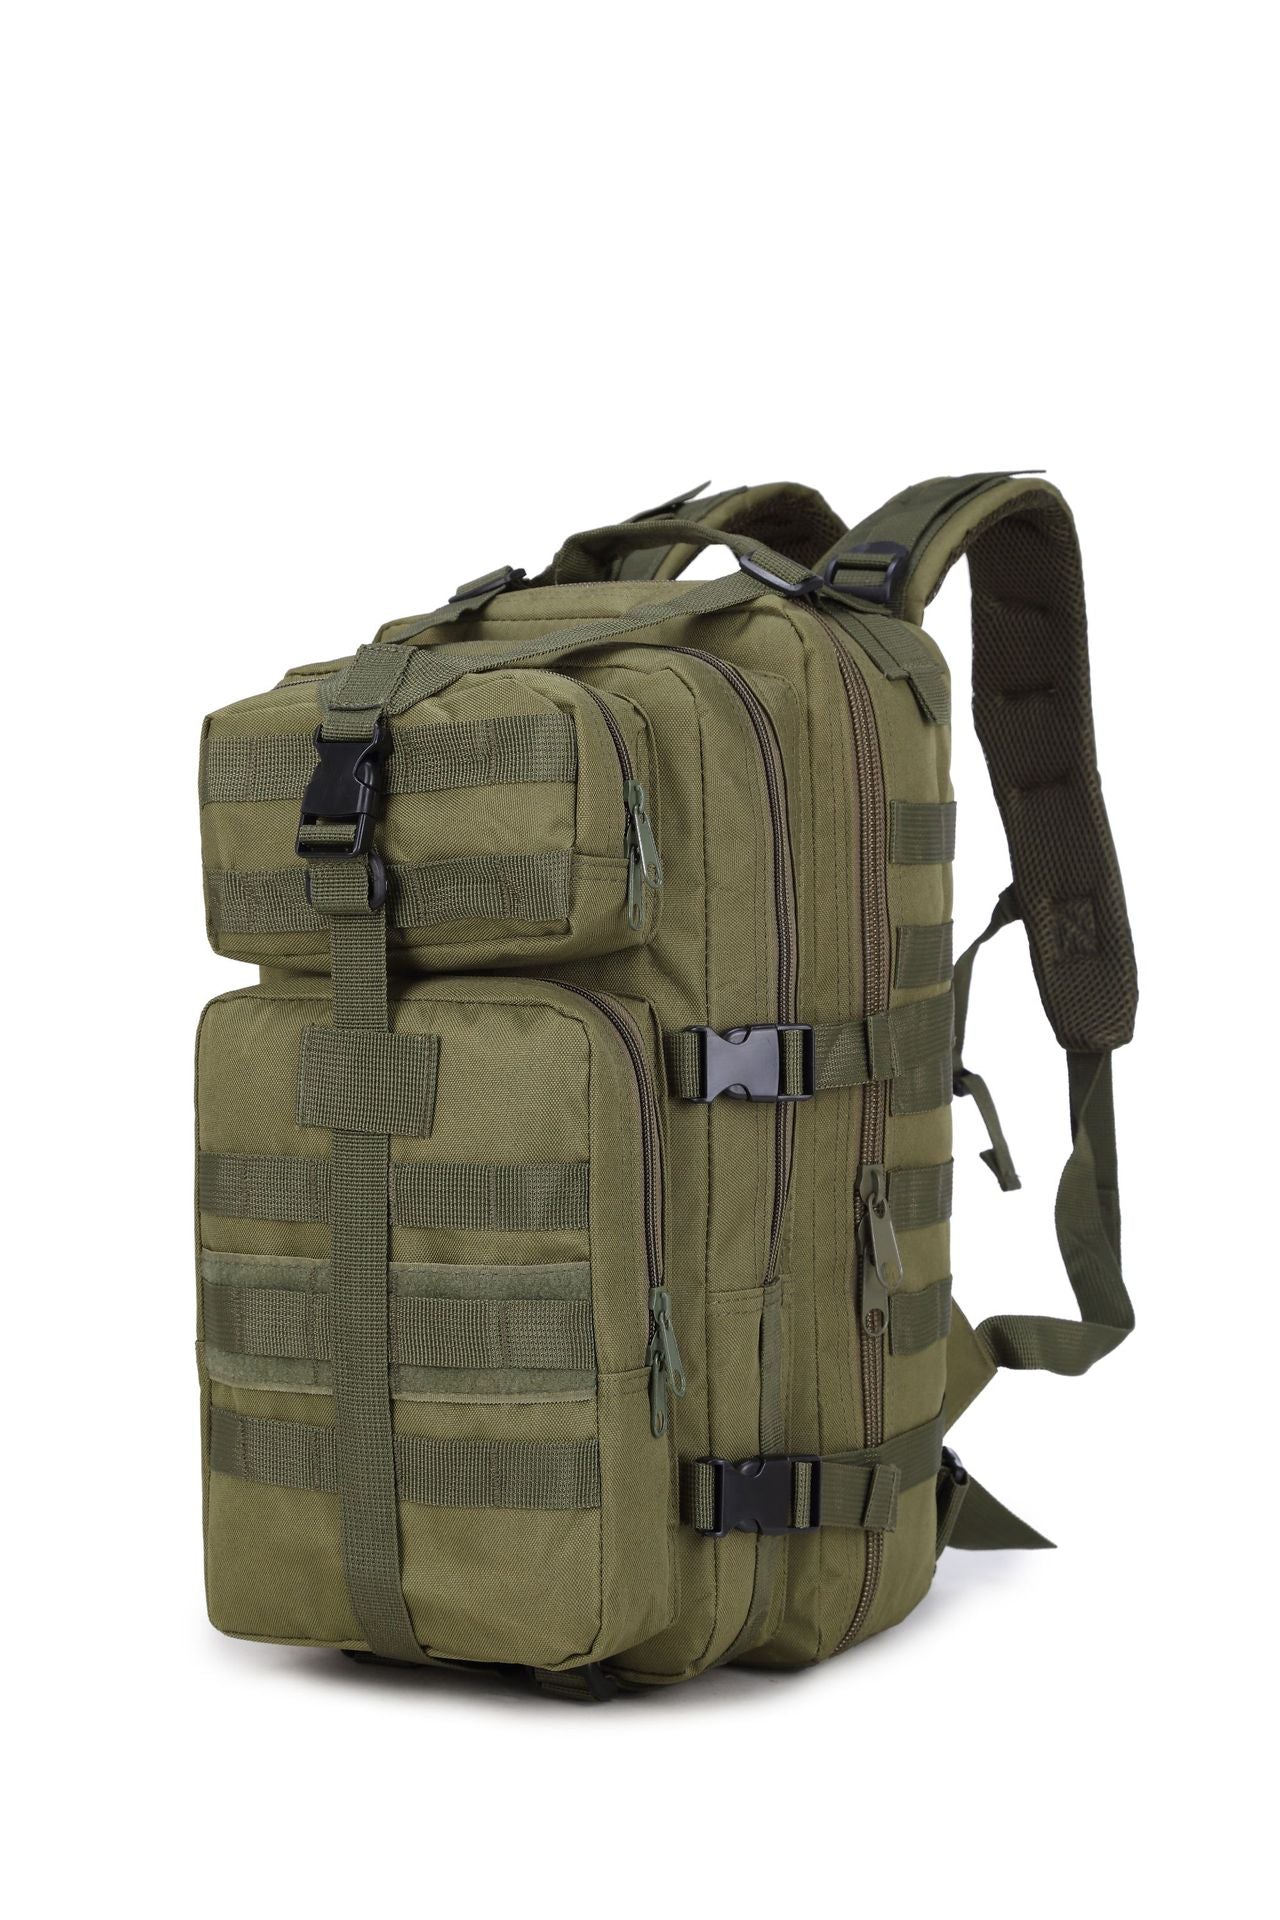 Army fan mountaineering tactical backpack